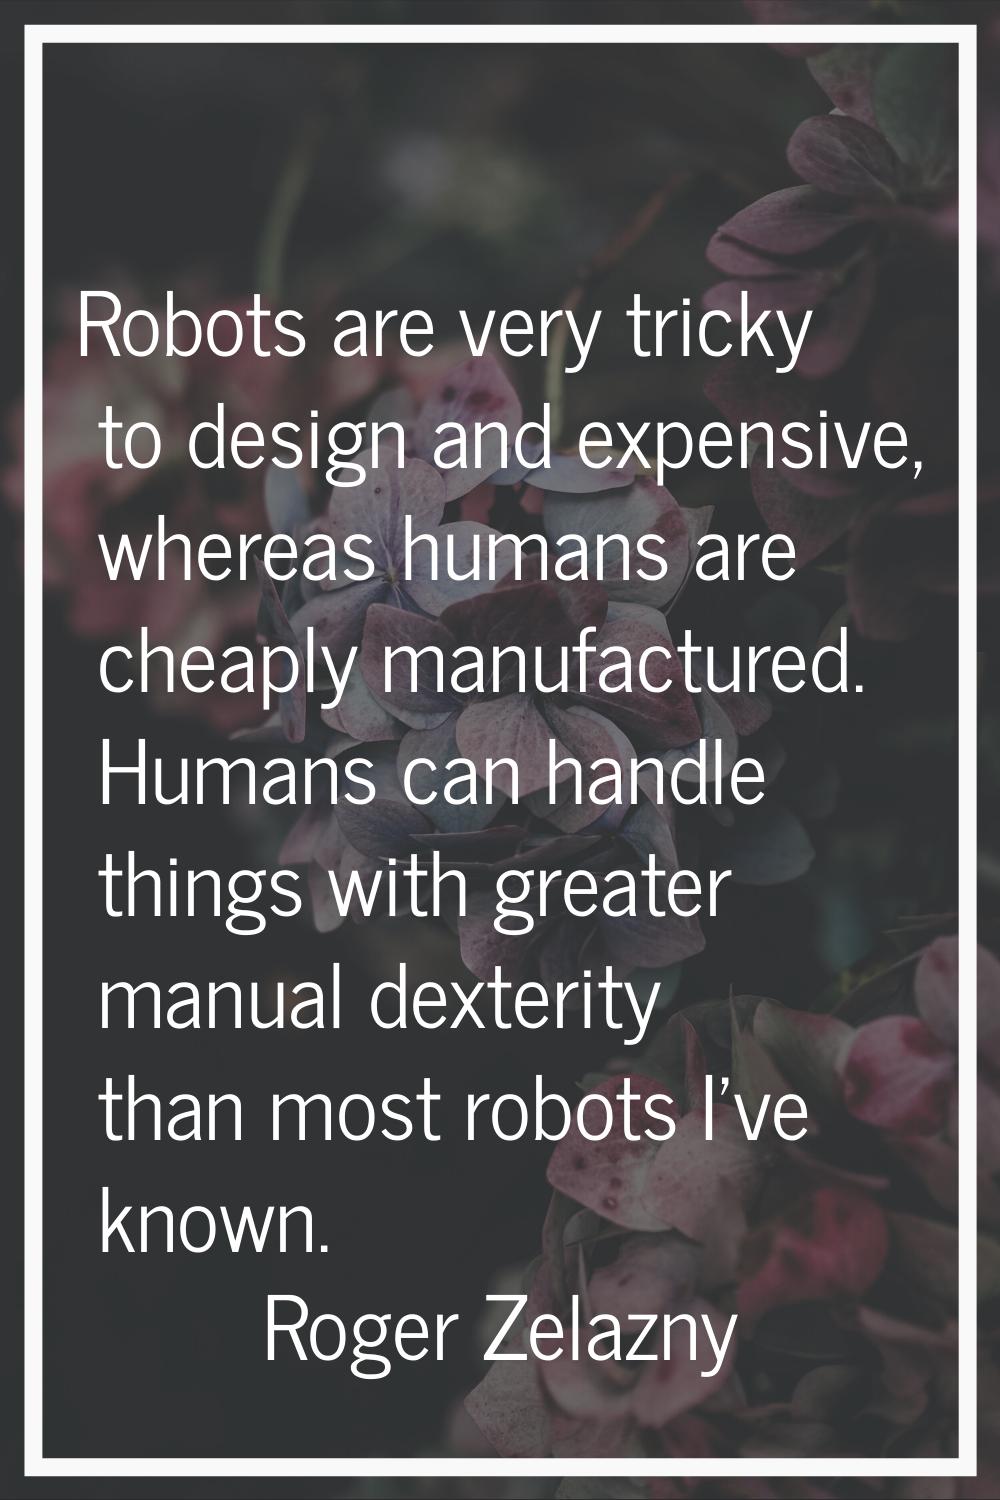 Robots are very tricky to design and expensive, whereas humans are cheaply manufactured. Humans can